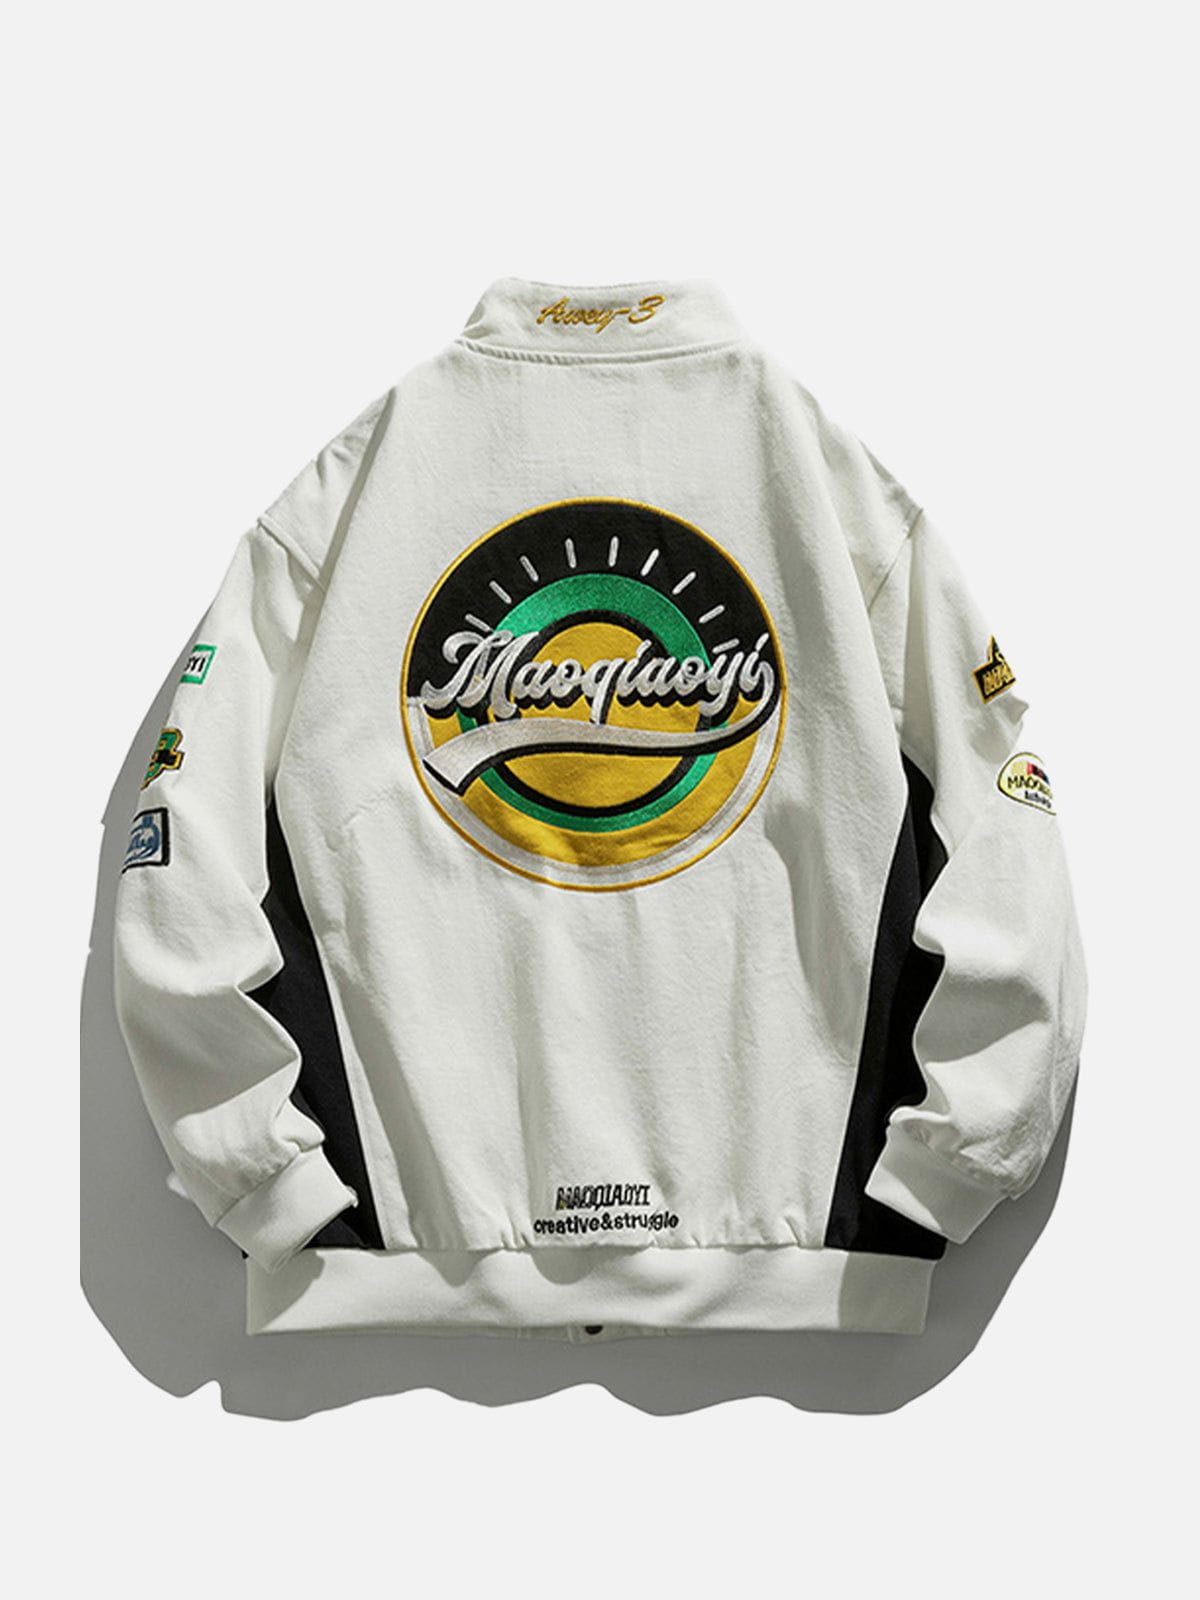 Majesda® - Vintage Motorcycle Embroidery Letters Jacket outfit ideas, streetwear fashion - majesda.com